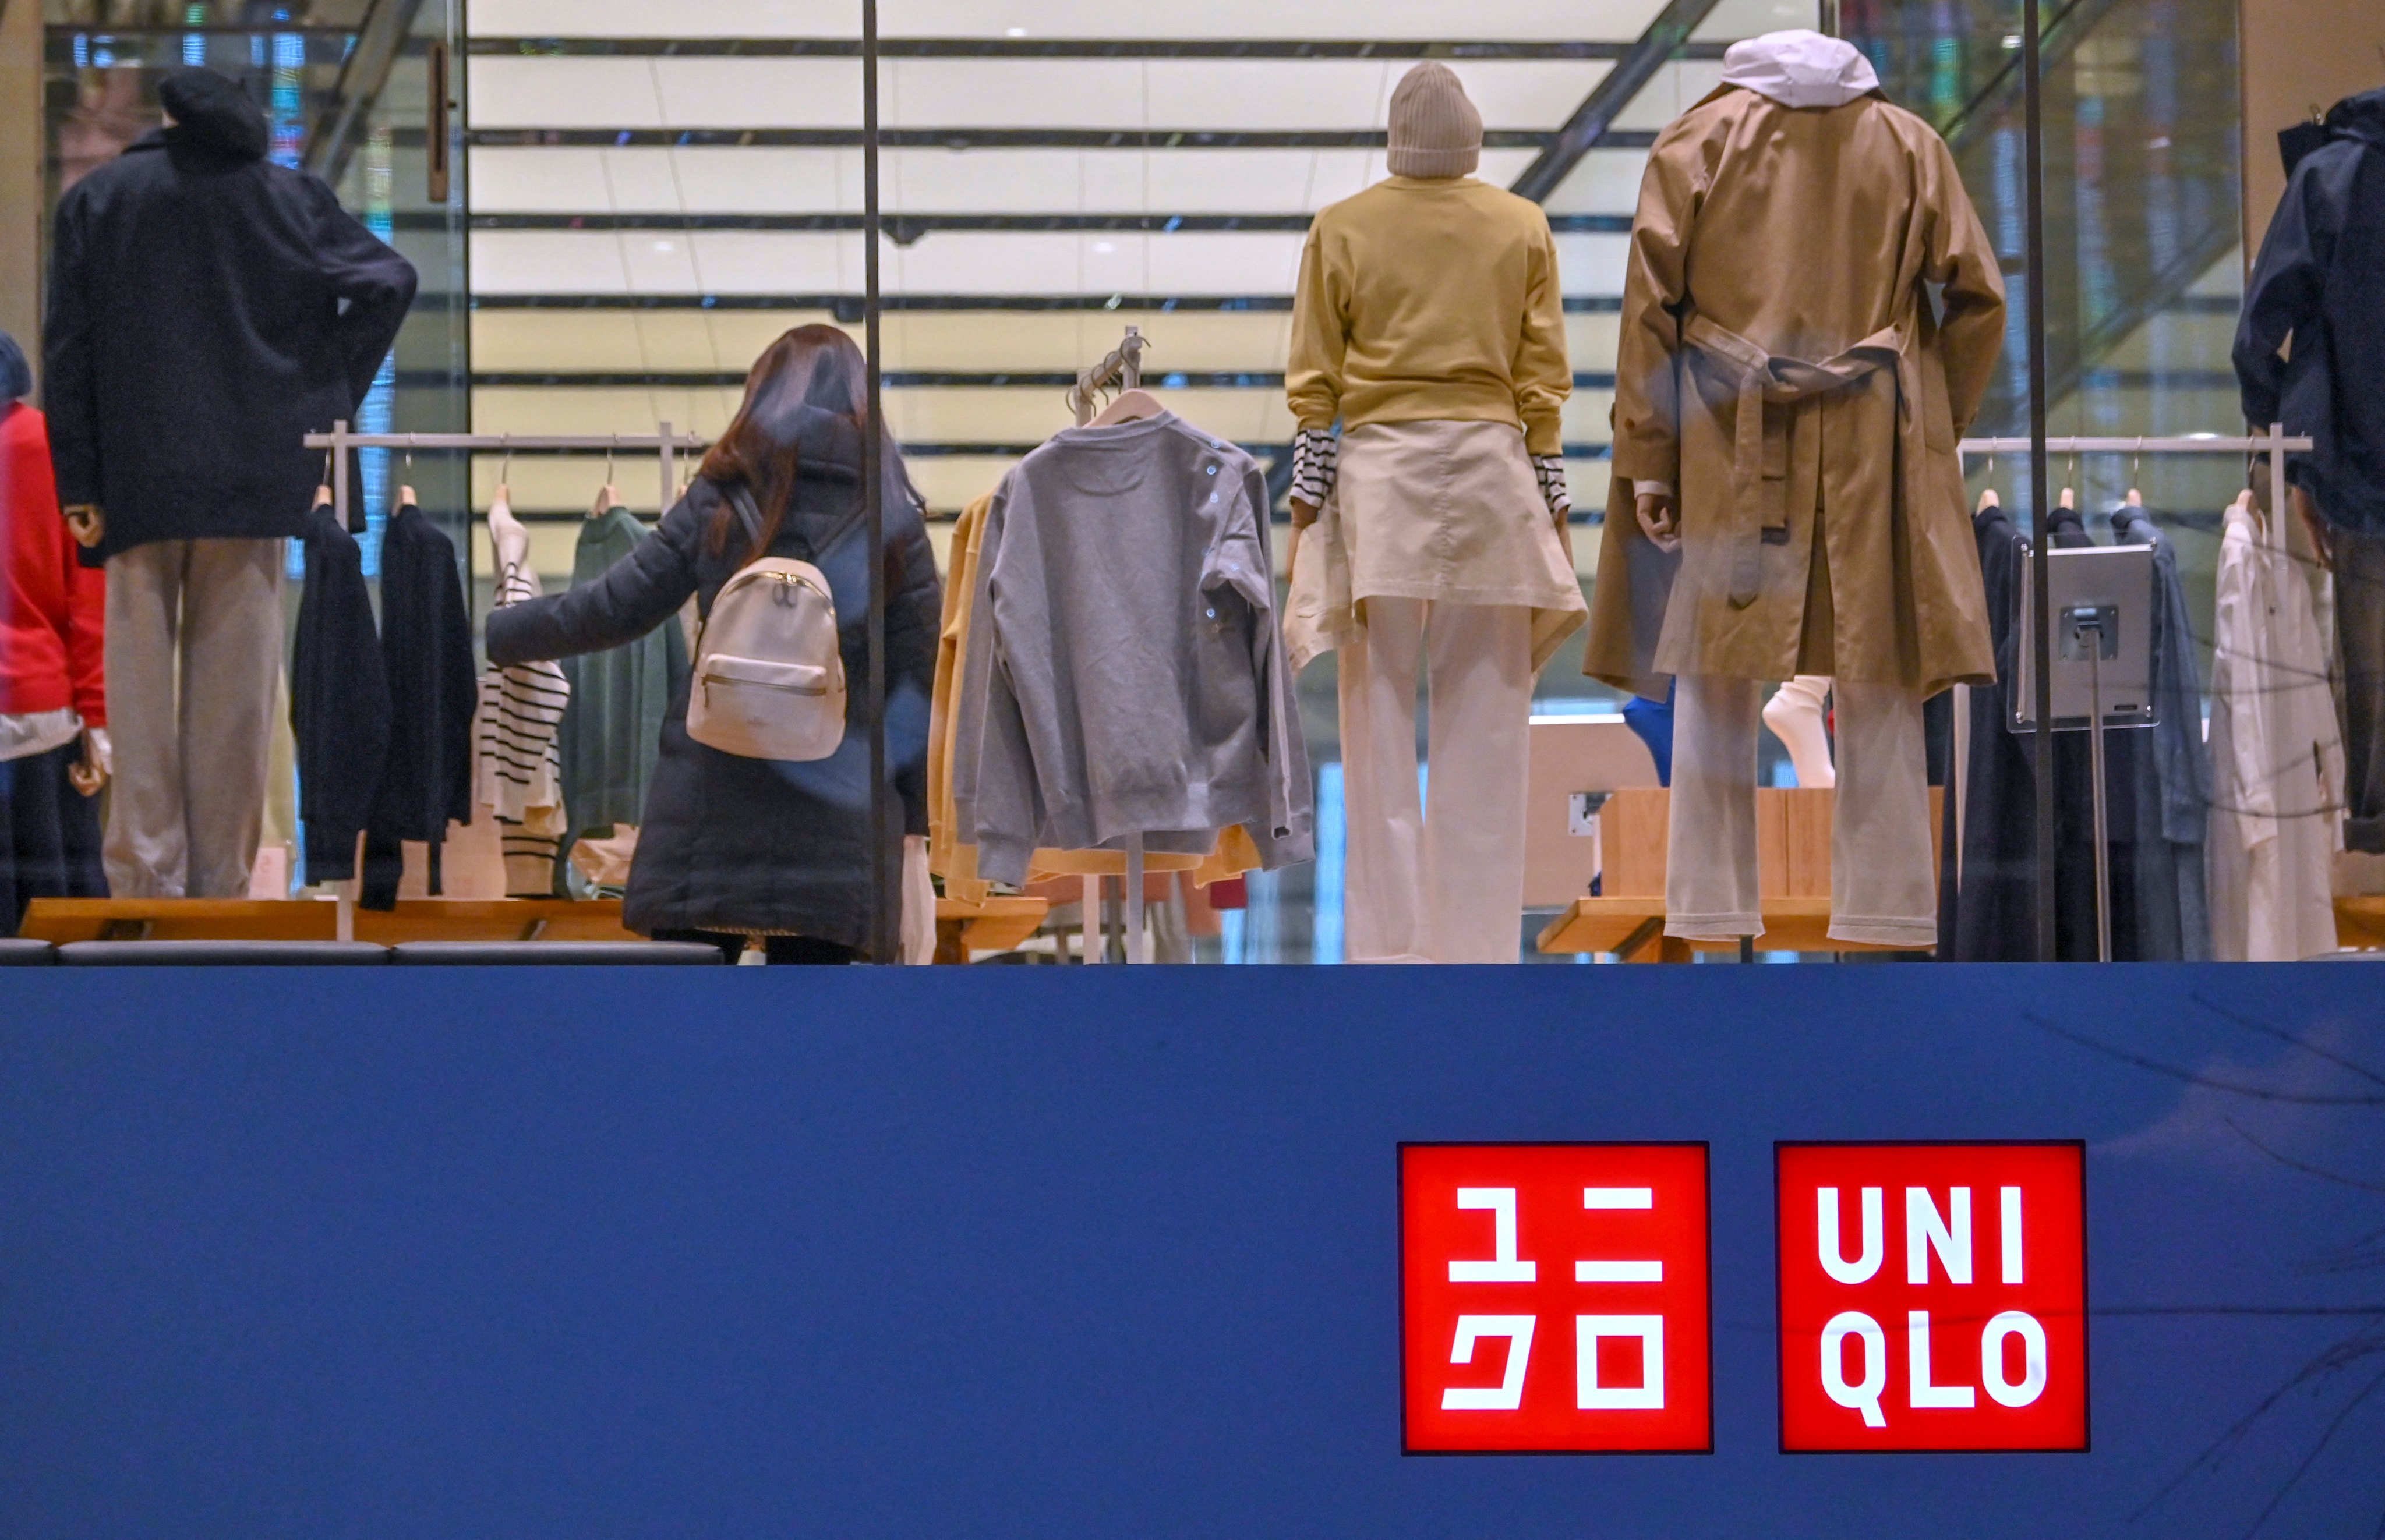 A Uniqlo store in Tokyo. Police arrested four Vietnamese nationals who arrived in Japan in September and were allegedly tasked with stealing from multiple Uniqlo outlets. Photo: AFP